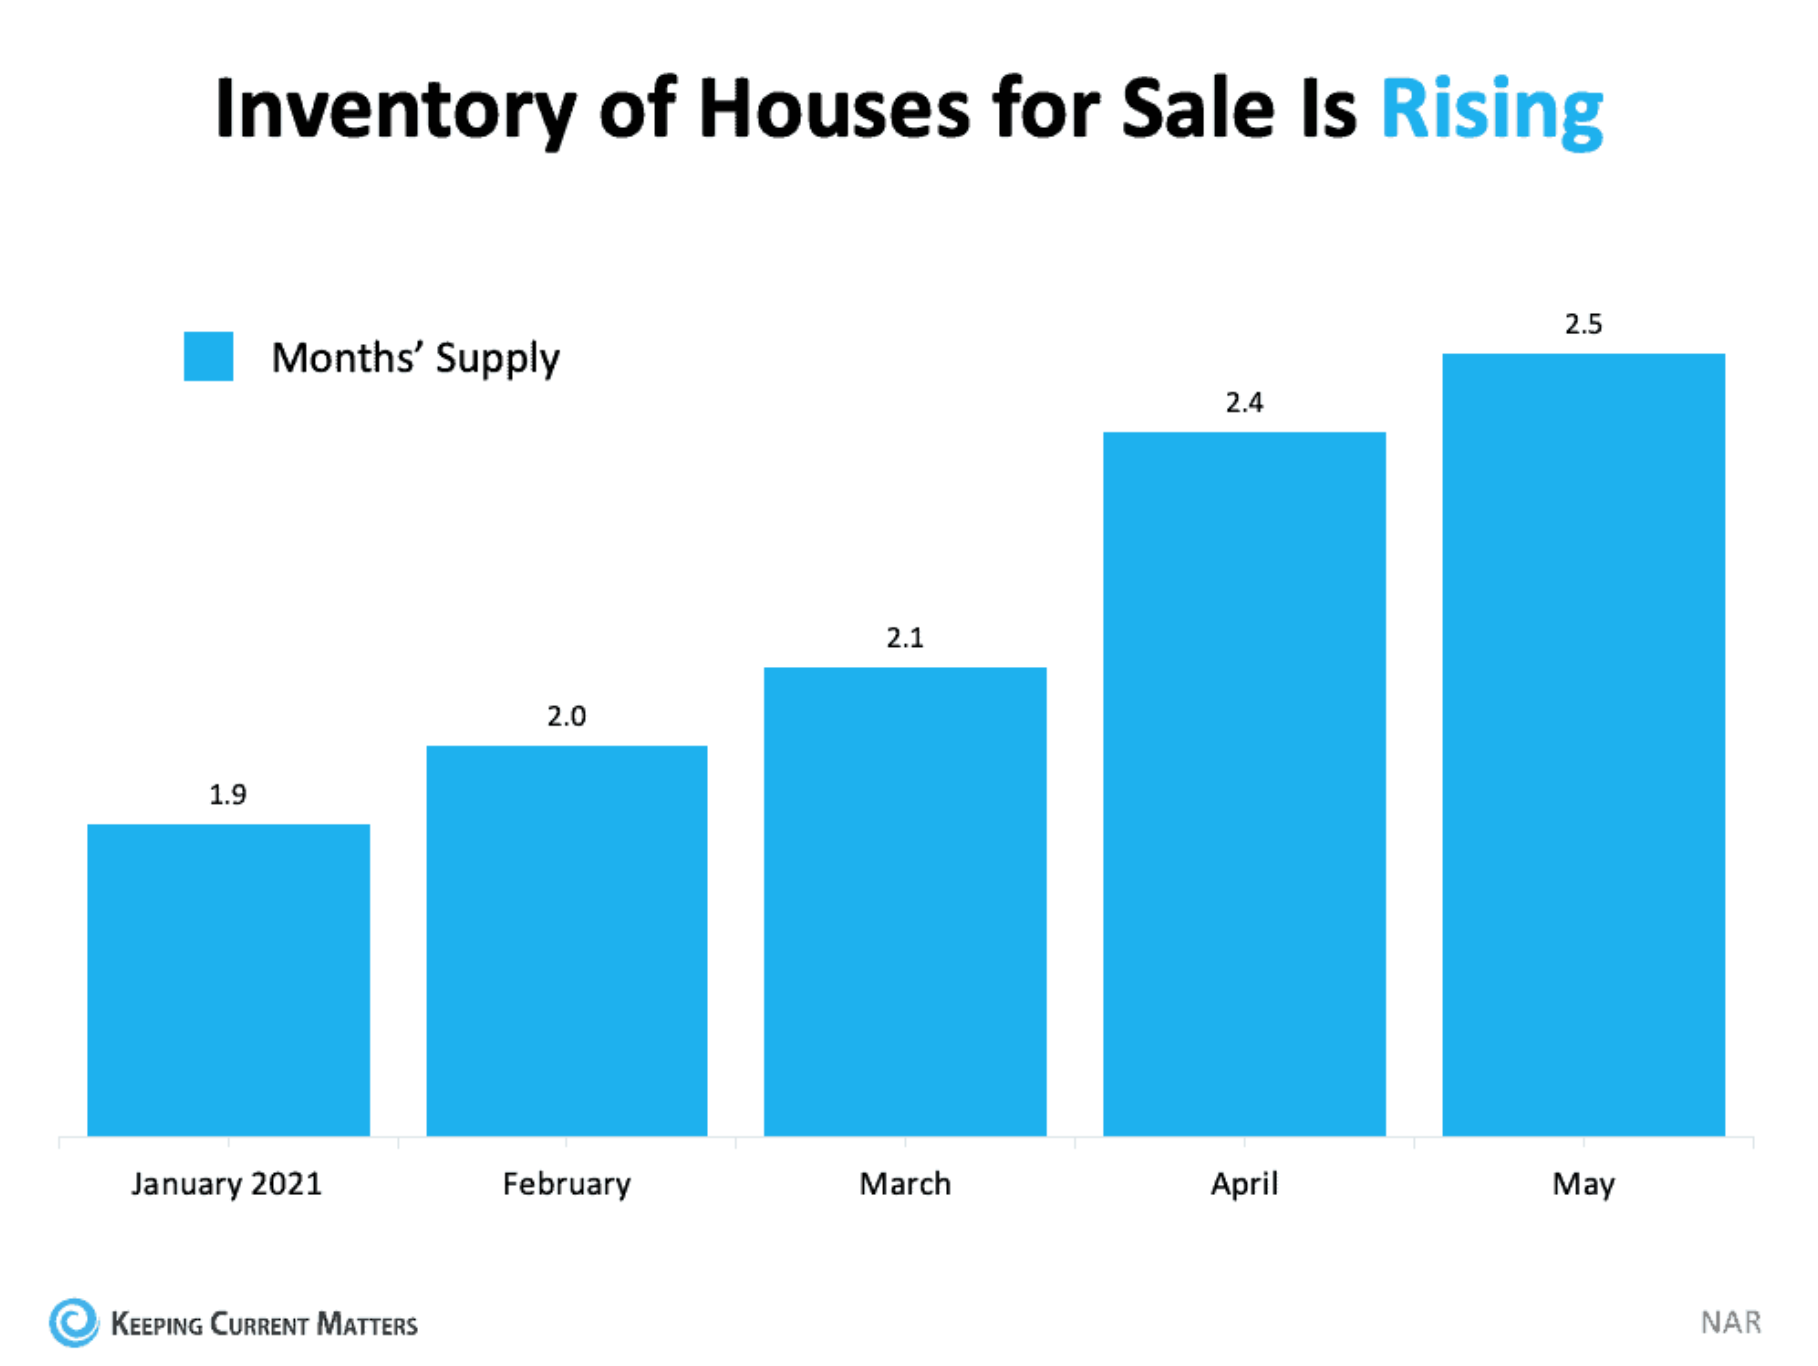 Inventory of houses for sale is rising